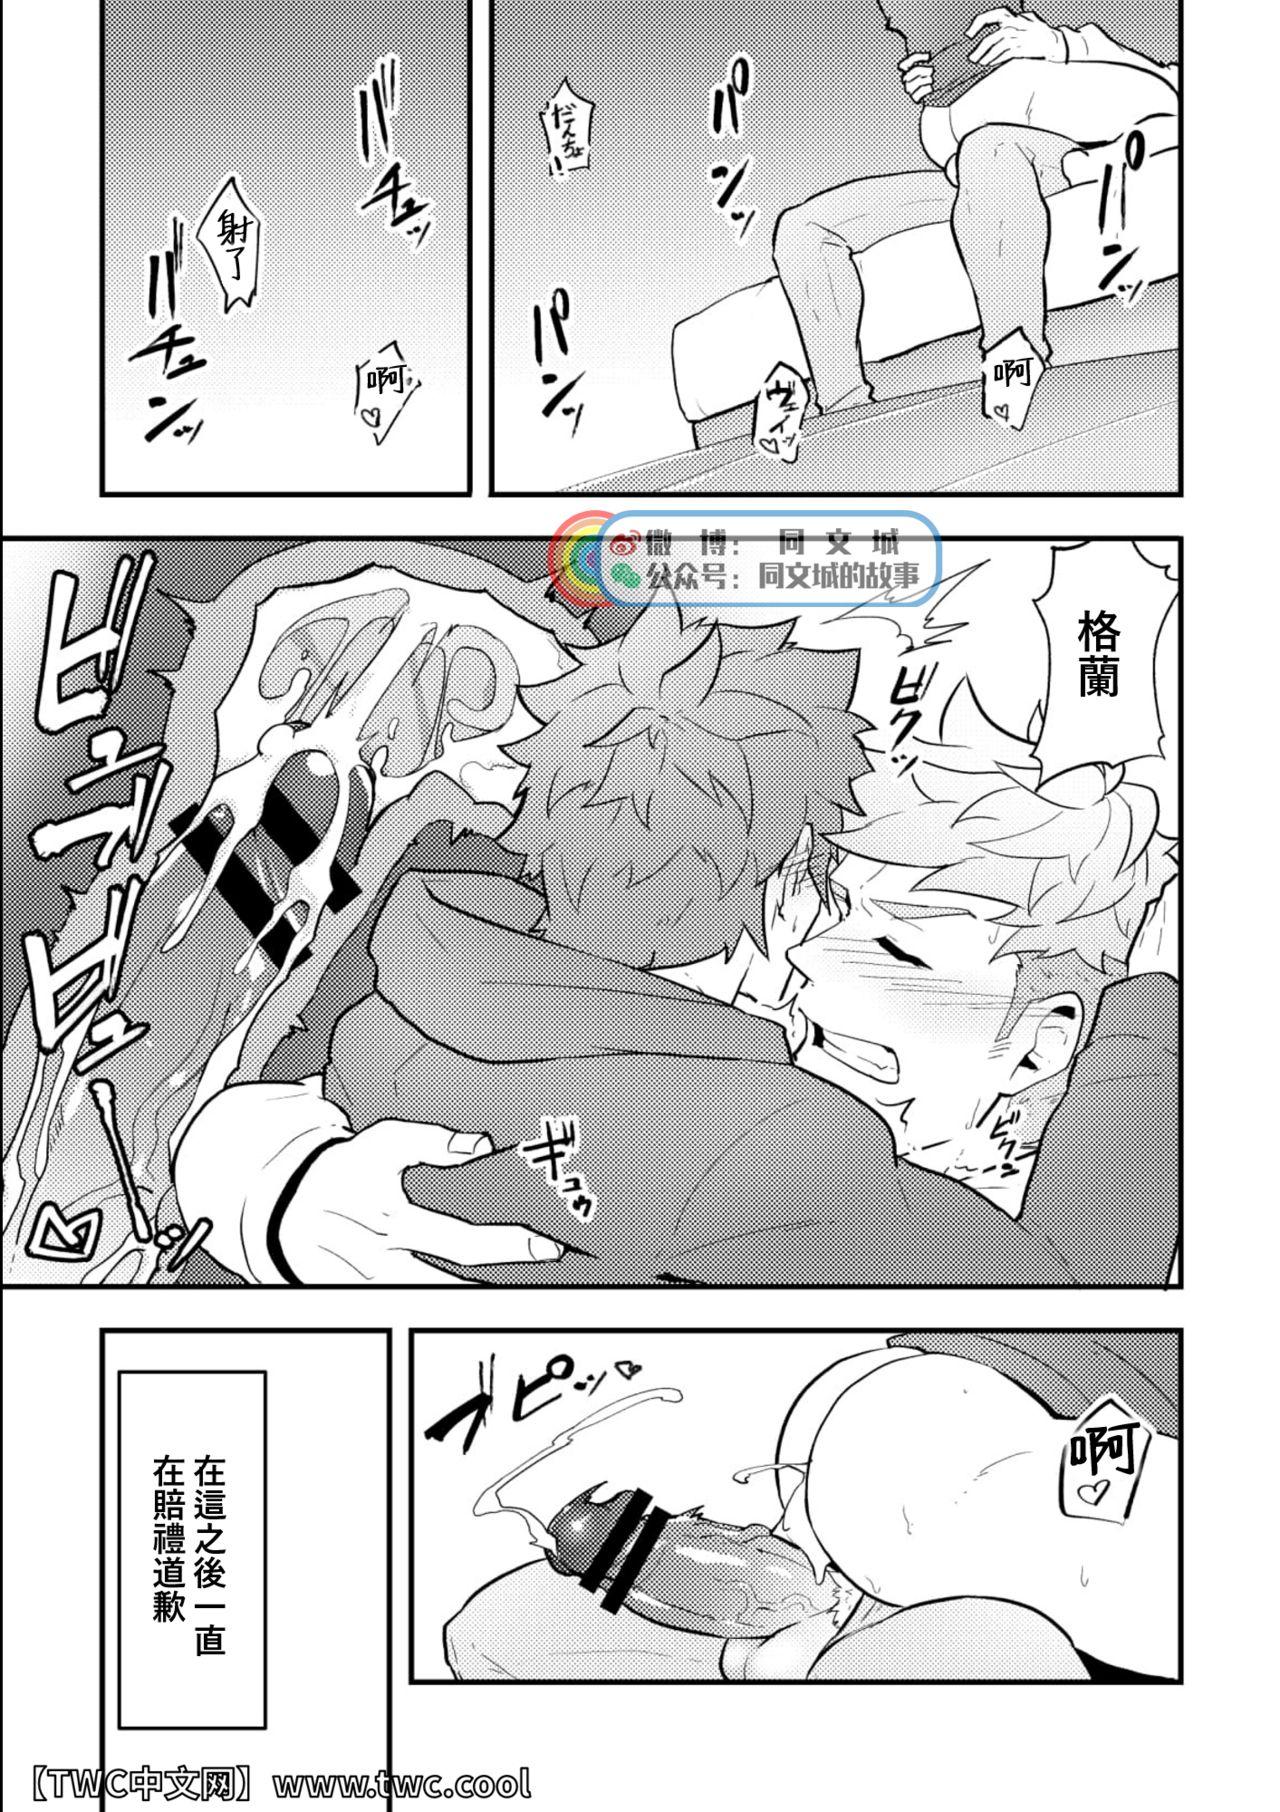 Mask Onabe Hon C95 - Granblue fantasy Punch out Pokemon | pocket monsters China - Page 5